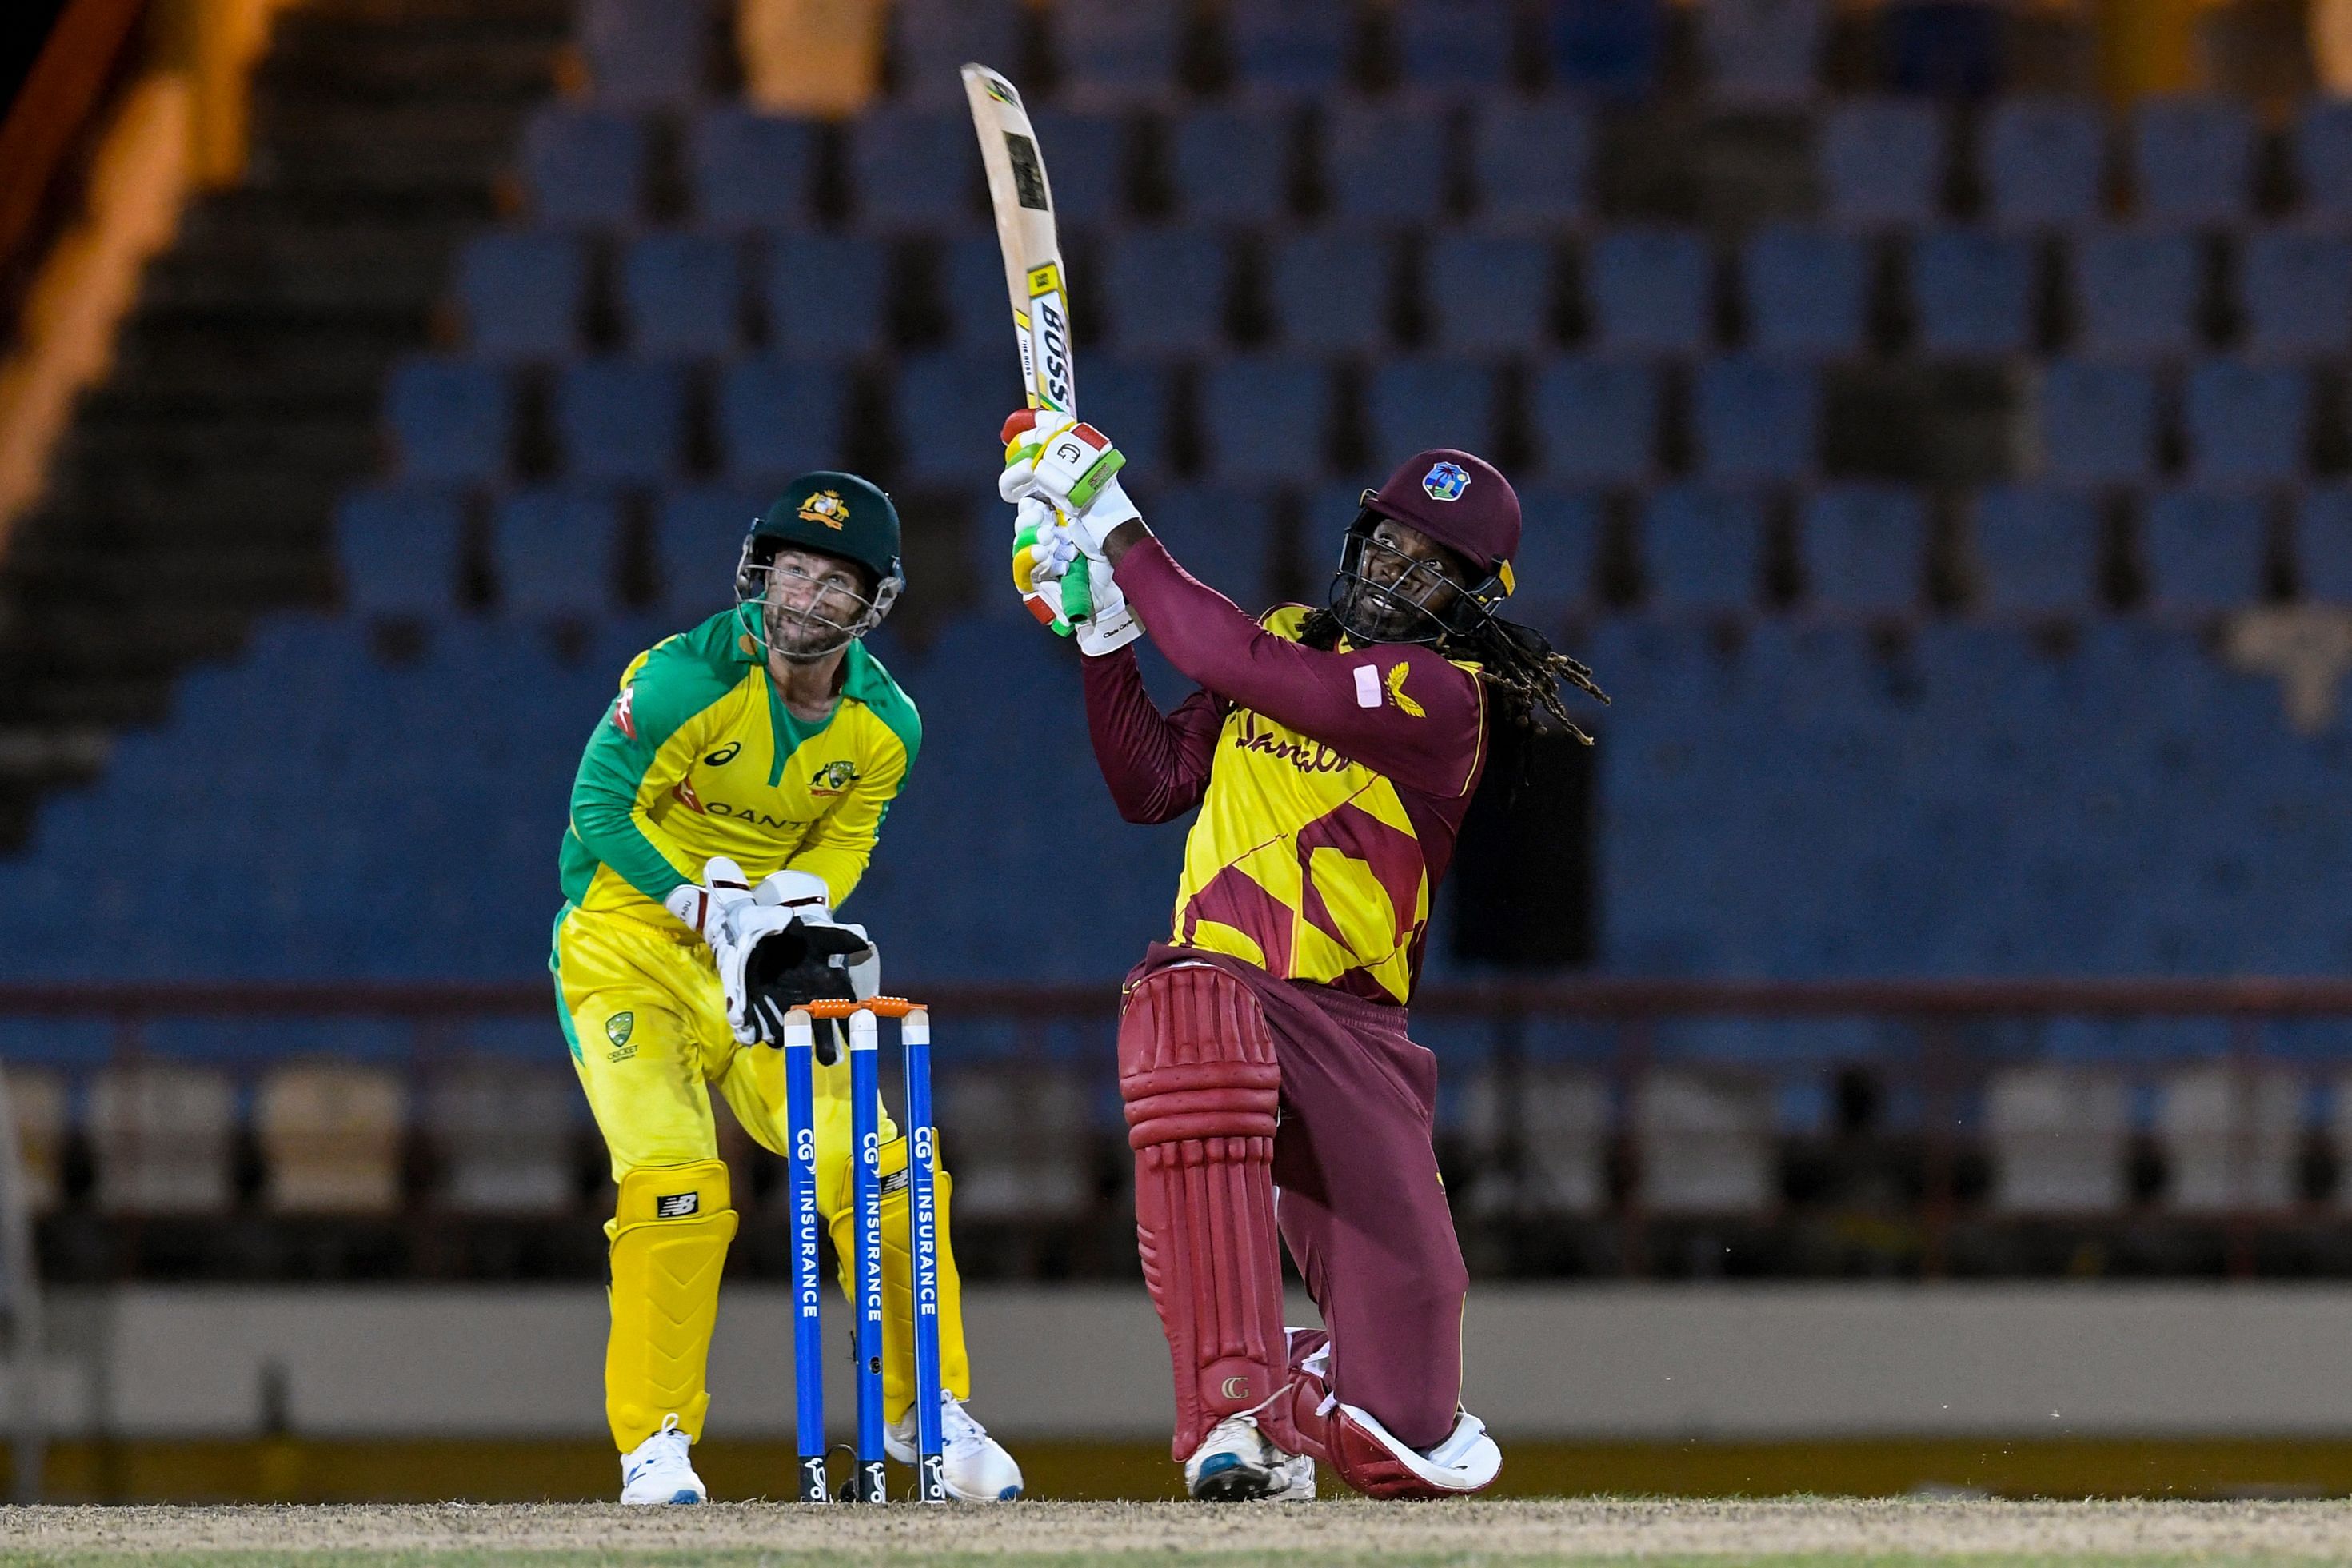 Chris Gayle (R) of West Indies hits 6 as Matthew Wade (L) of Australia watches during the 3rd T20I between Australia and West Indies at Darren Sammy Cricket Ground, Gros Islet, Saint Lucia, on July 12, 2021. Credit: AFP Photo